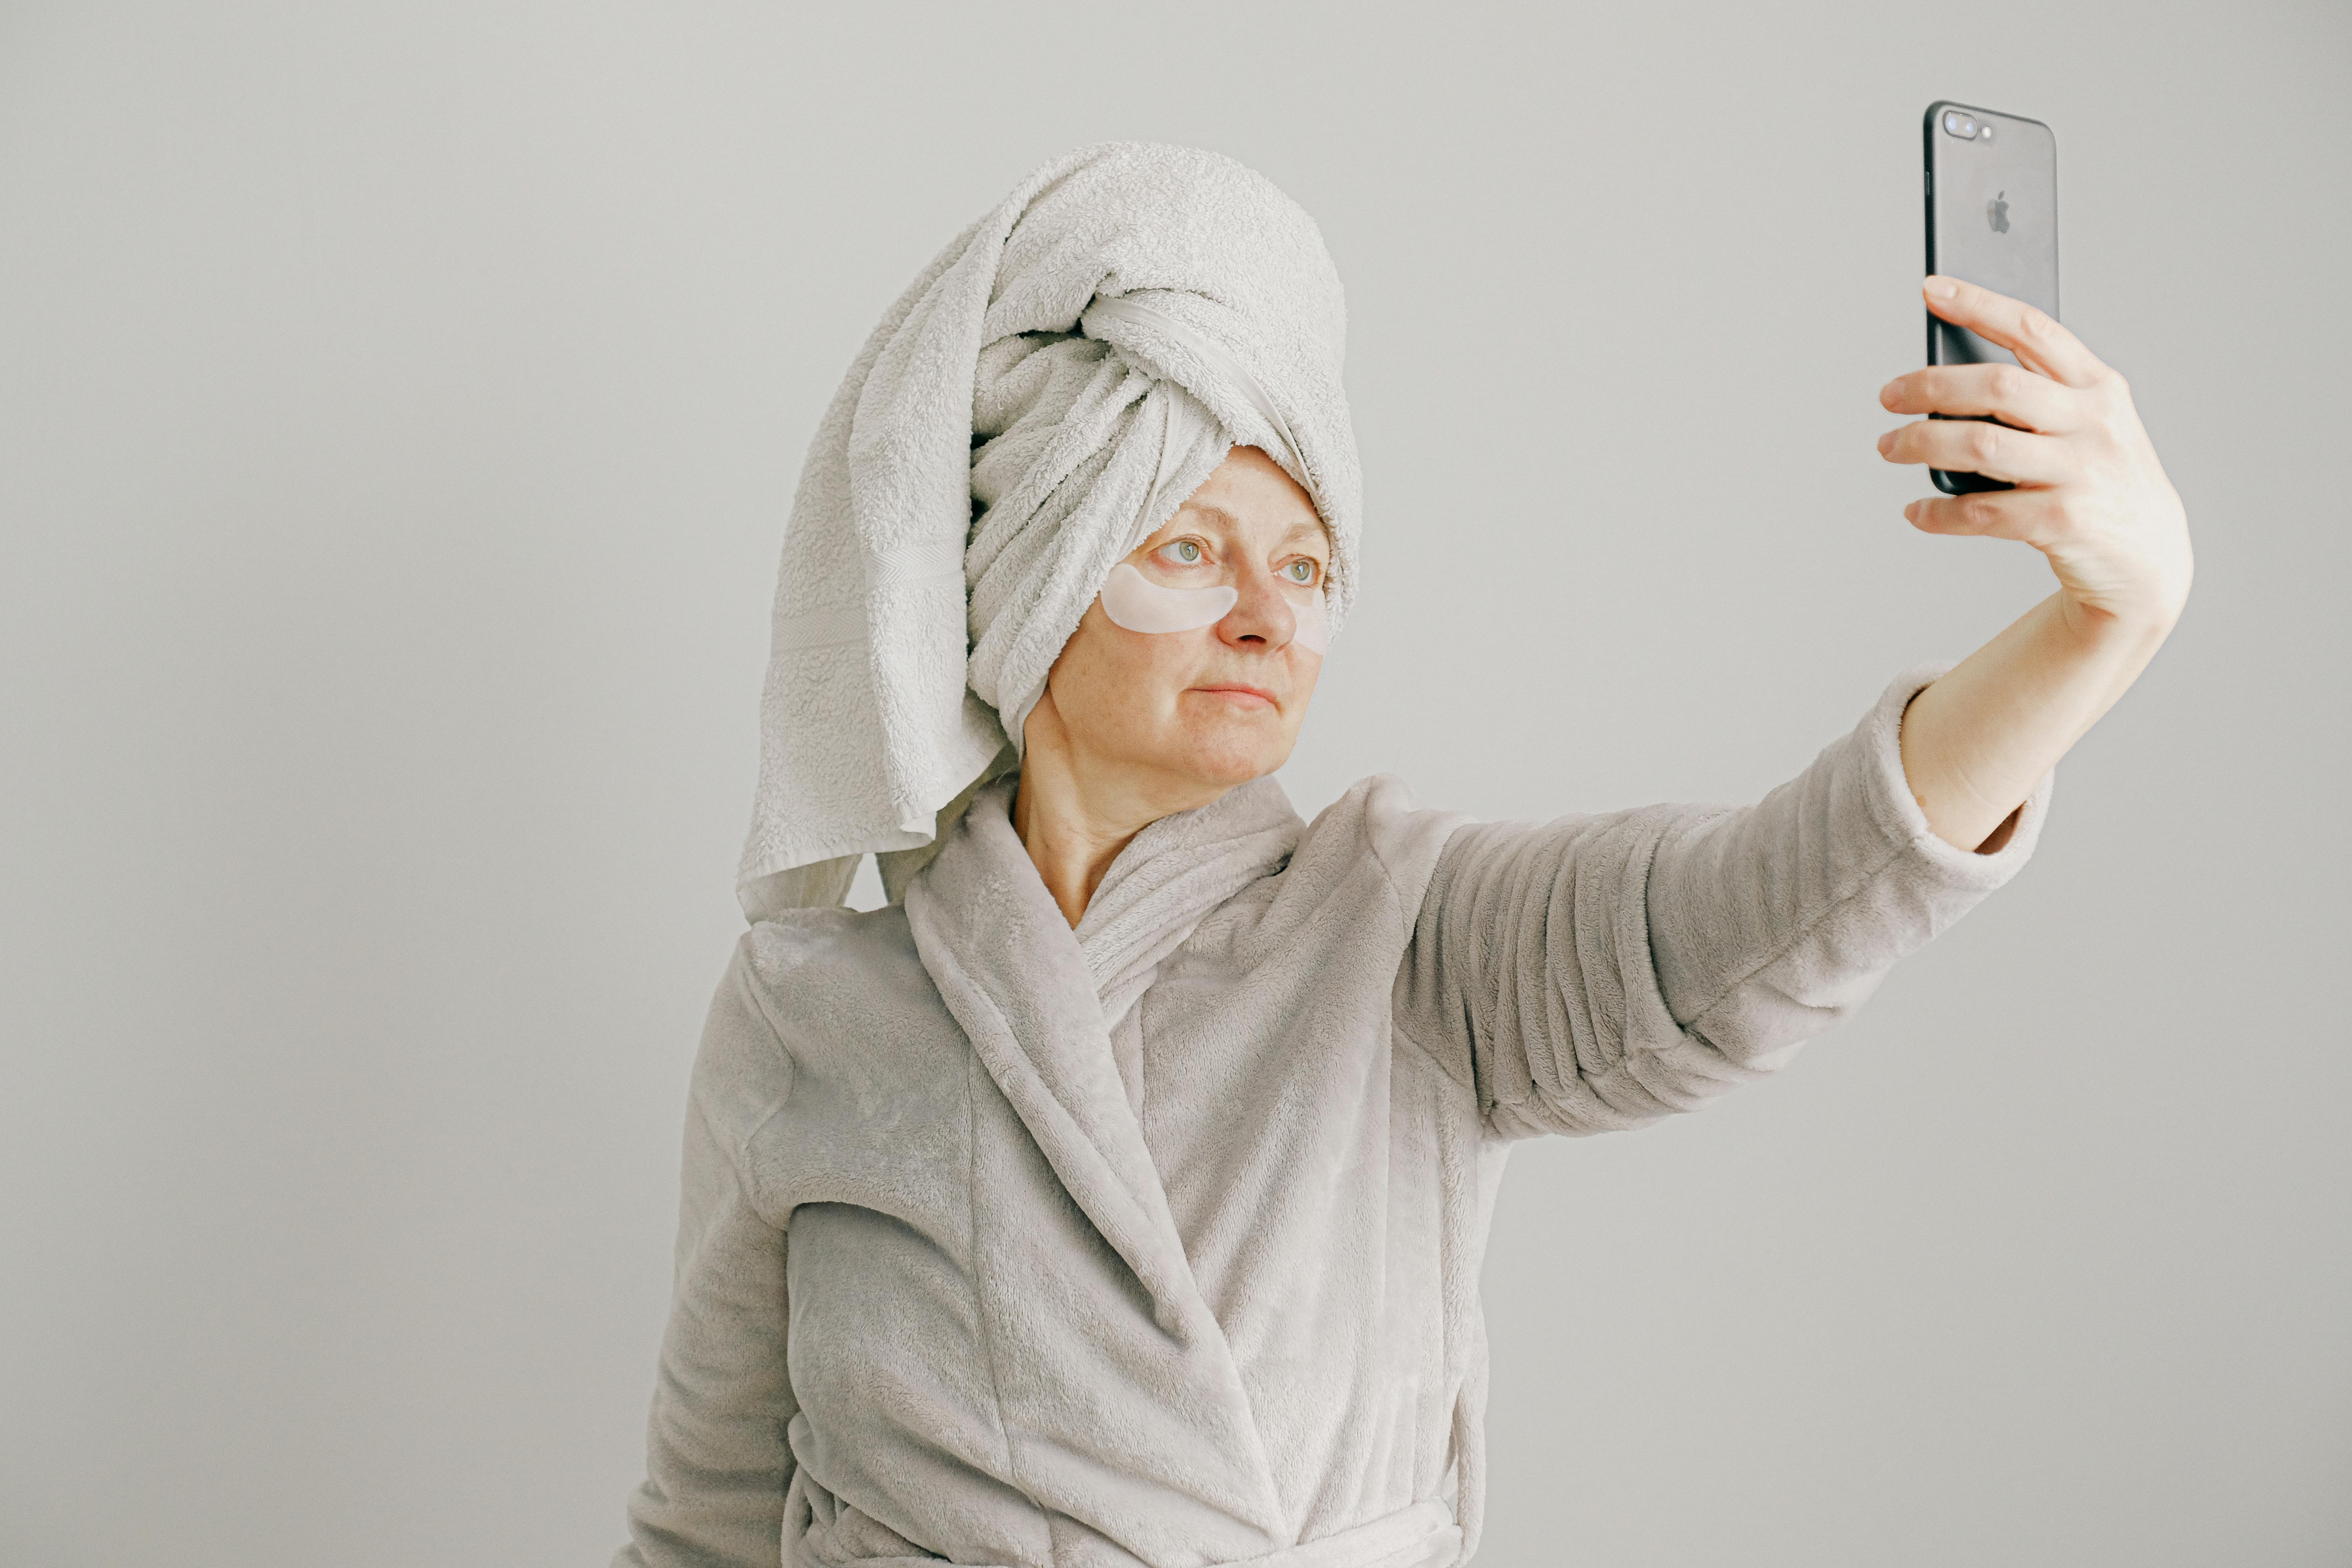 A woman in gray bathrobe holding a mobile phone. | Photo: Pexels